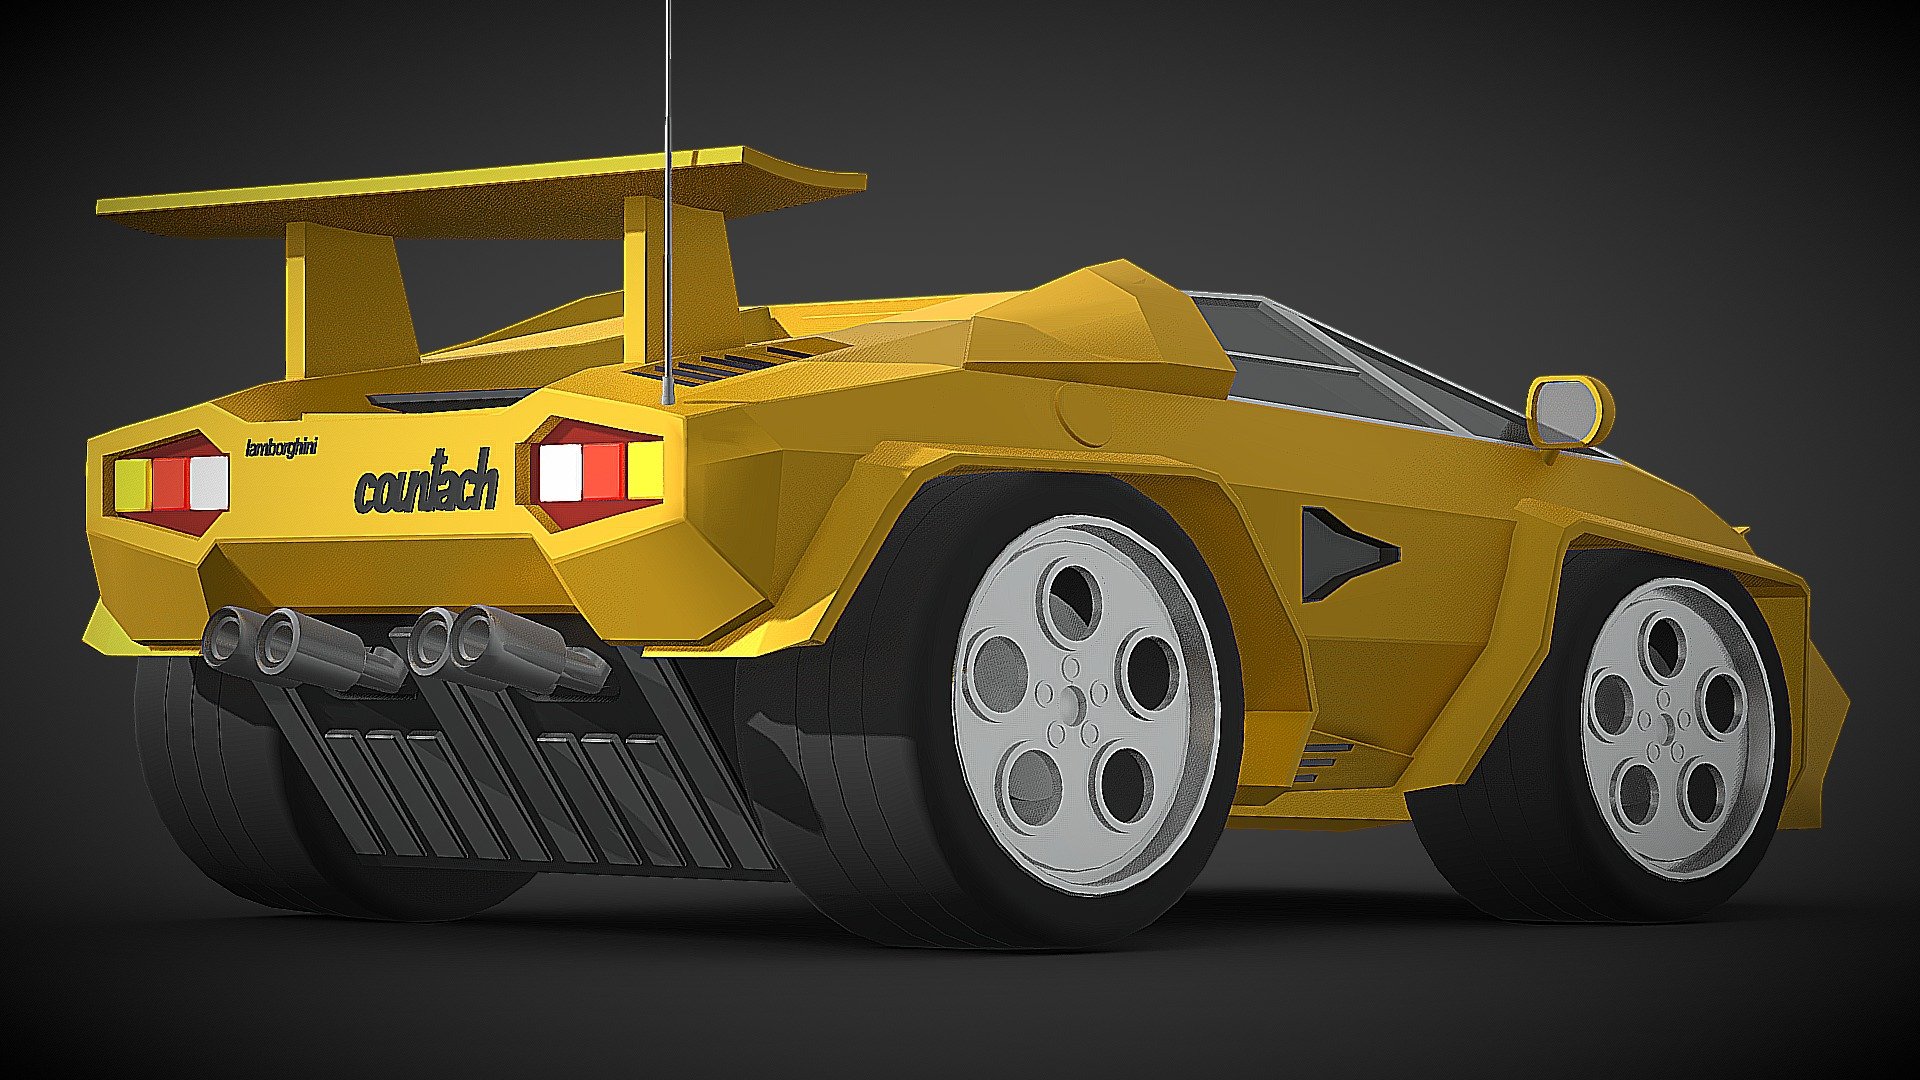 Cartoon Lamborghini Countach

I decided to use a new 3D design, which I had never tested before, I had already done a Lamborghini Countach some time ago, so I was familiar with it, so I took over the design from from scratch, but this time with a cartoon design, and I think the result is cool!

Base lamborghini Countach :

https://sketchfab.com/3d-models/lamborghini-countach-lp500s-special-500k-views-32e9ee8d129e4c2992e1753b4fc3094c

Blender 3.0 - By SDC PERFROMANCE - Low poly/Cartoon Design - [FREE] Cartoon Lamborghini Countach - SDC - Download Free 3D model by SDC PERFORMANCE™️ (@3Duae) 3d model